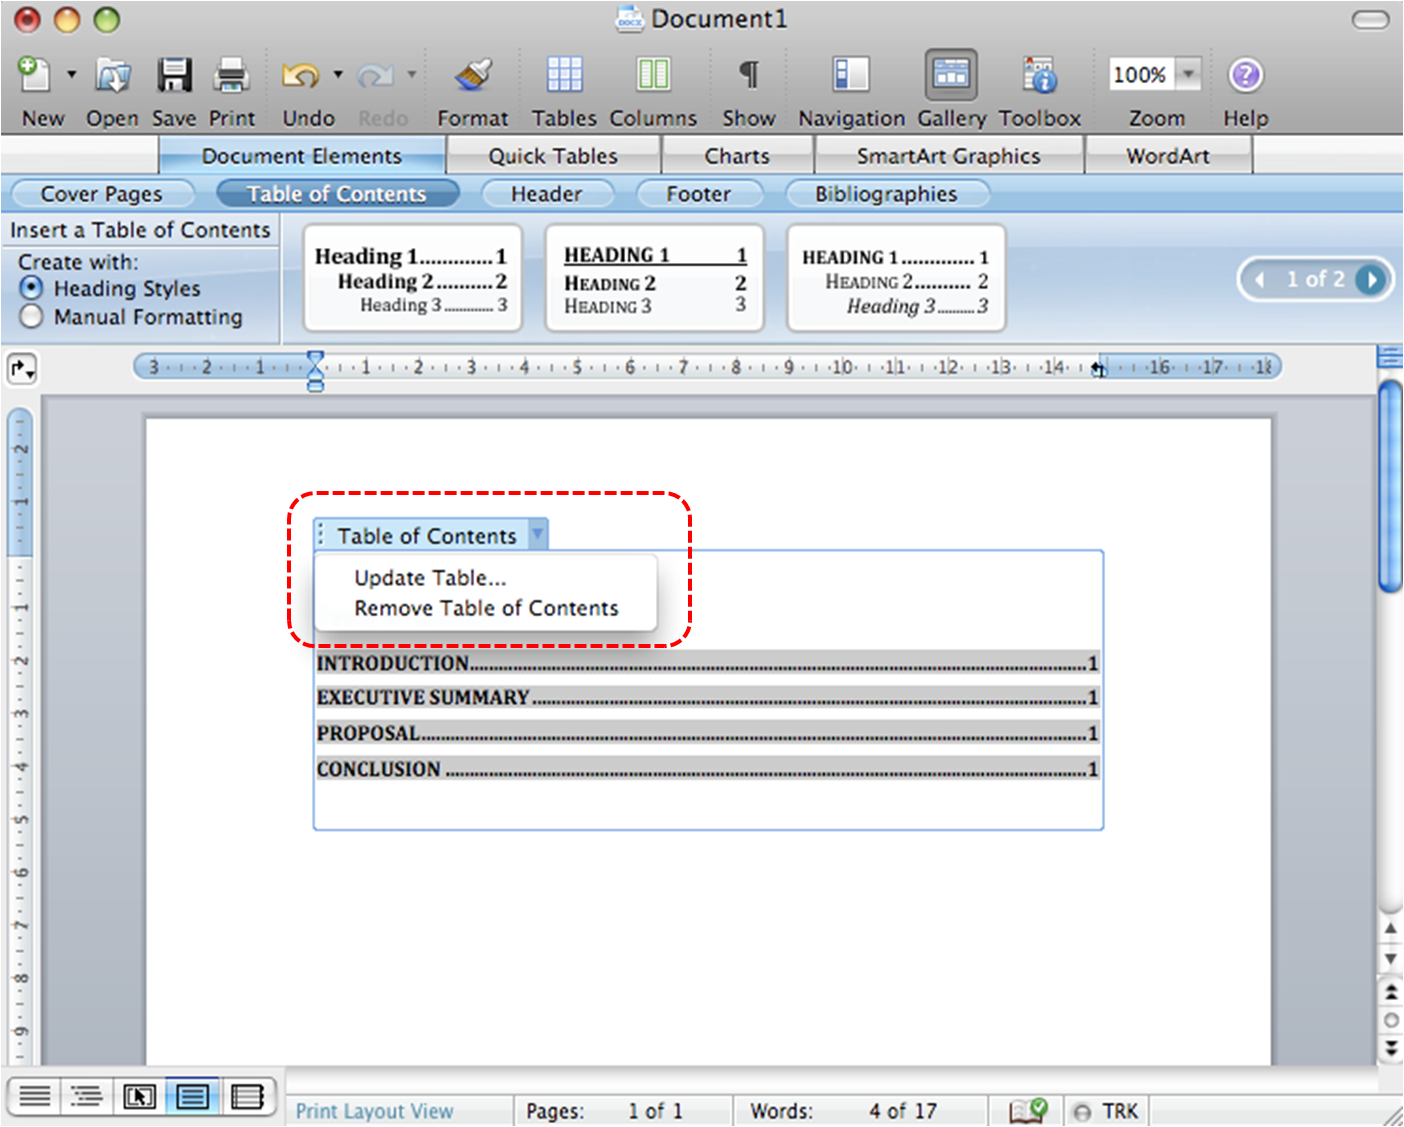 Image demonstrates Table of Contents menu as a result of selecting the icon beside Table of Contents.